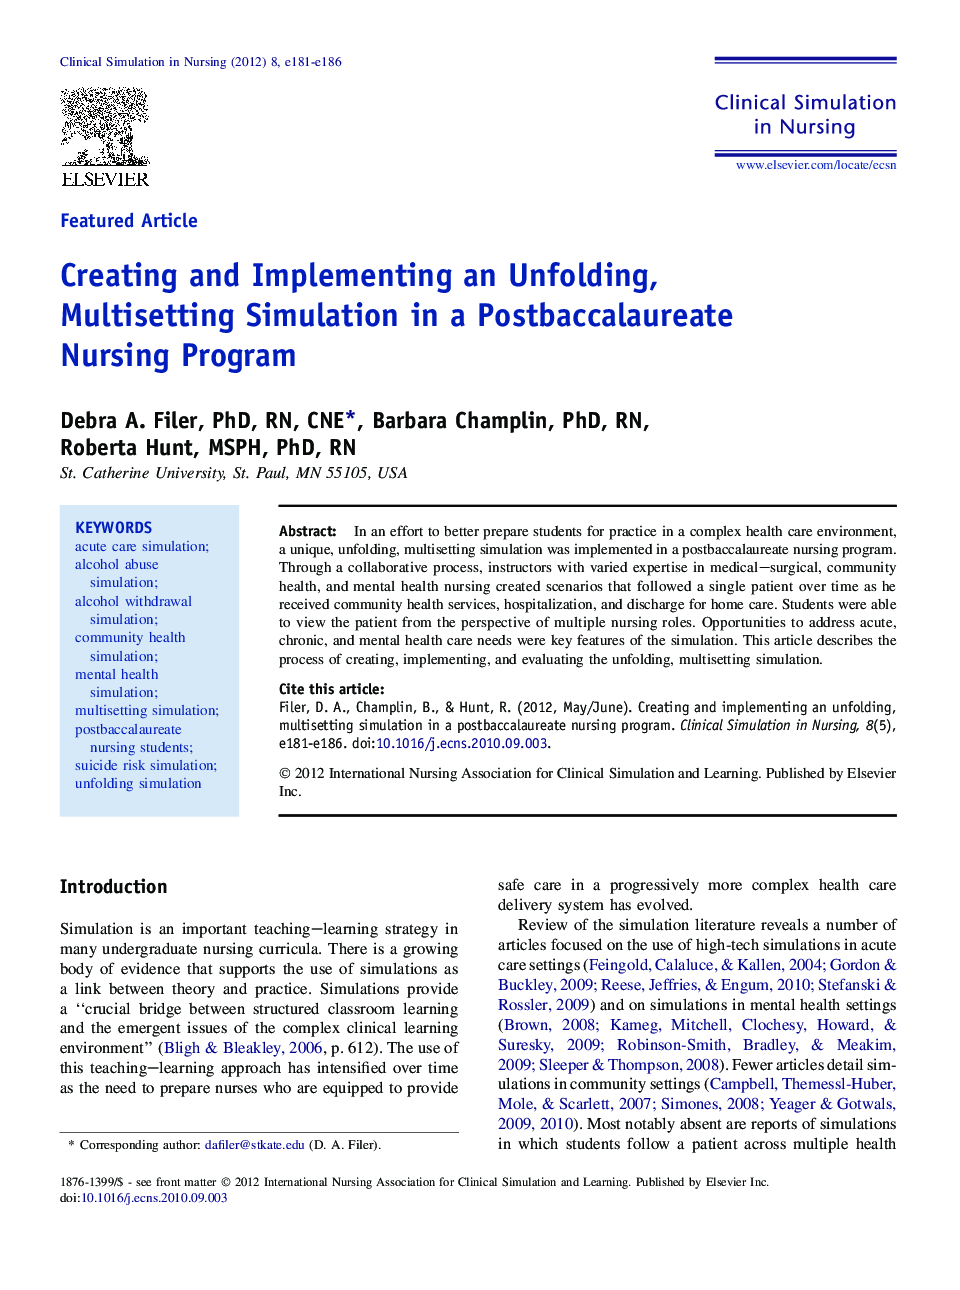 Creating and Implementing an Unfolding, Multisetting Simulation in a Postbaccalaureate Nursing Program